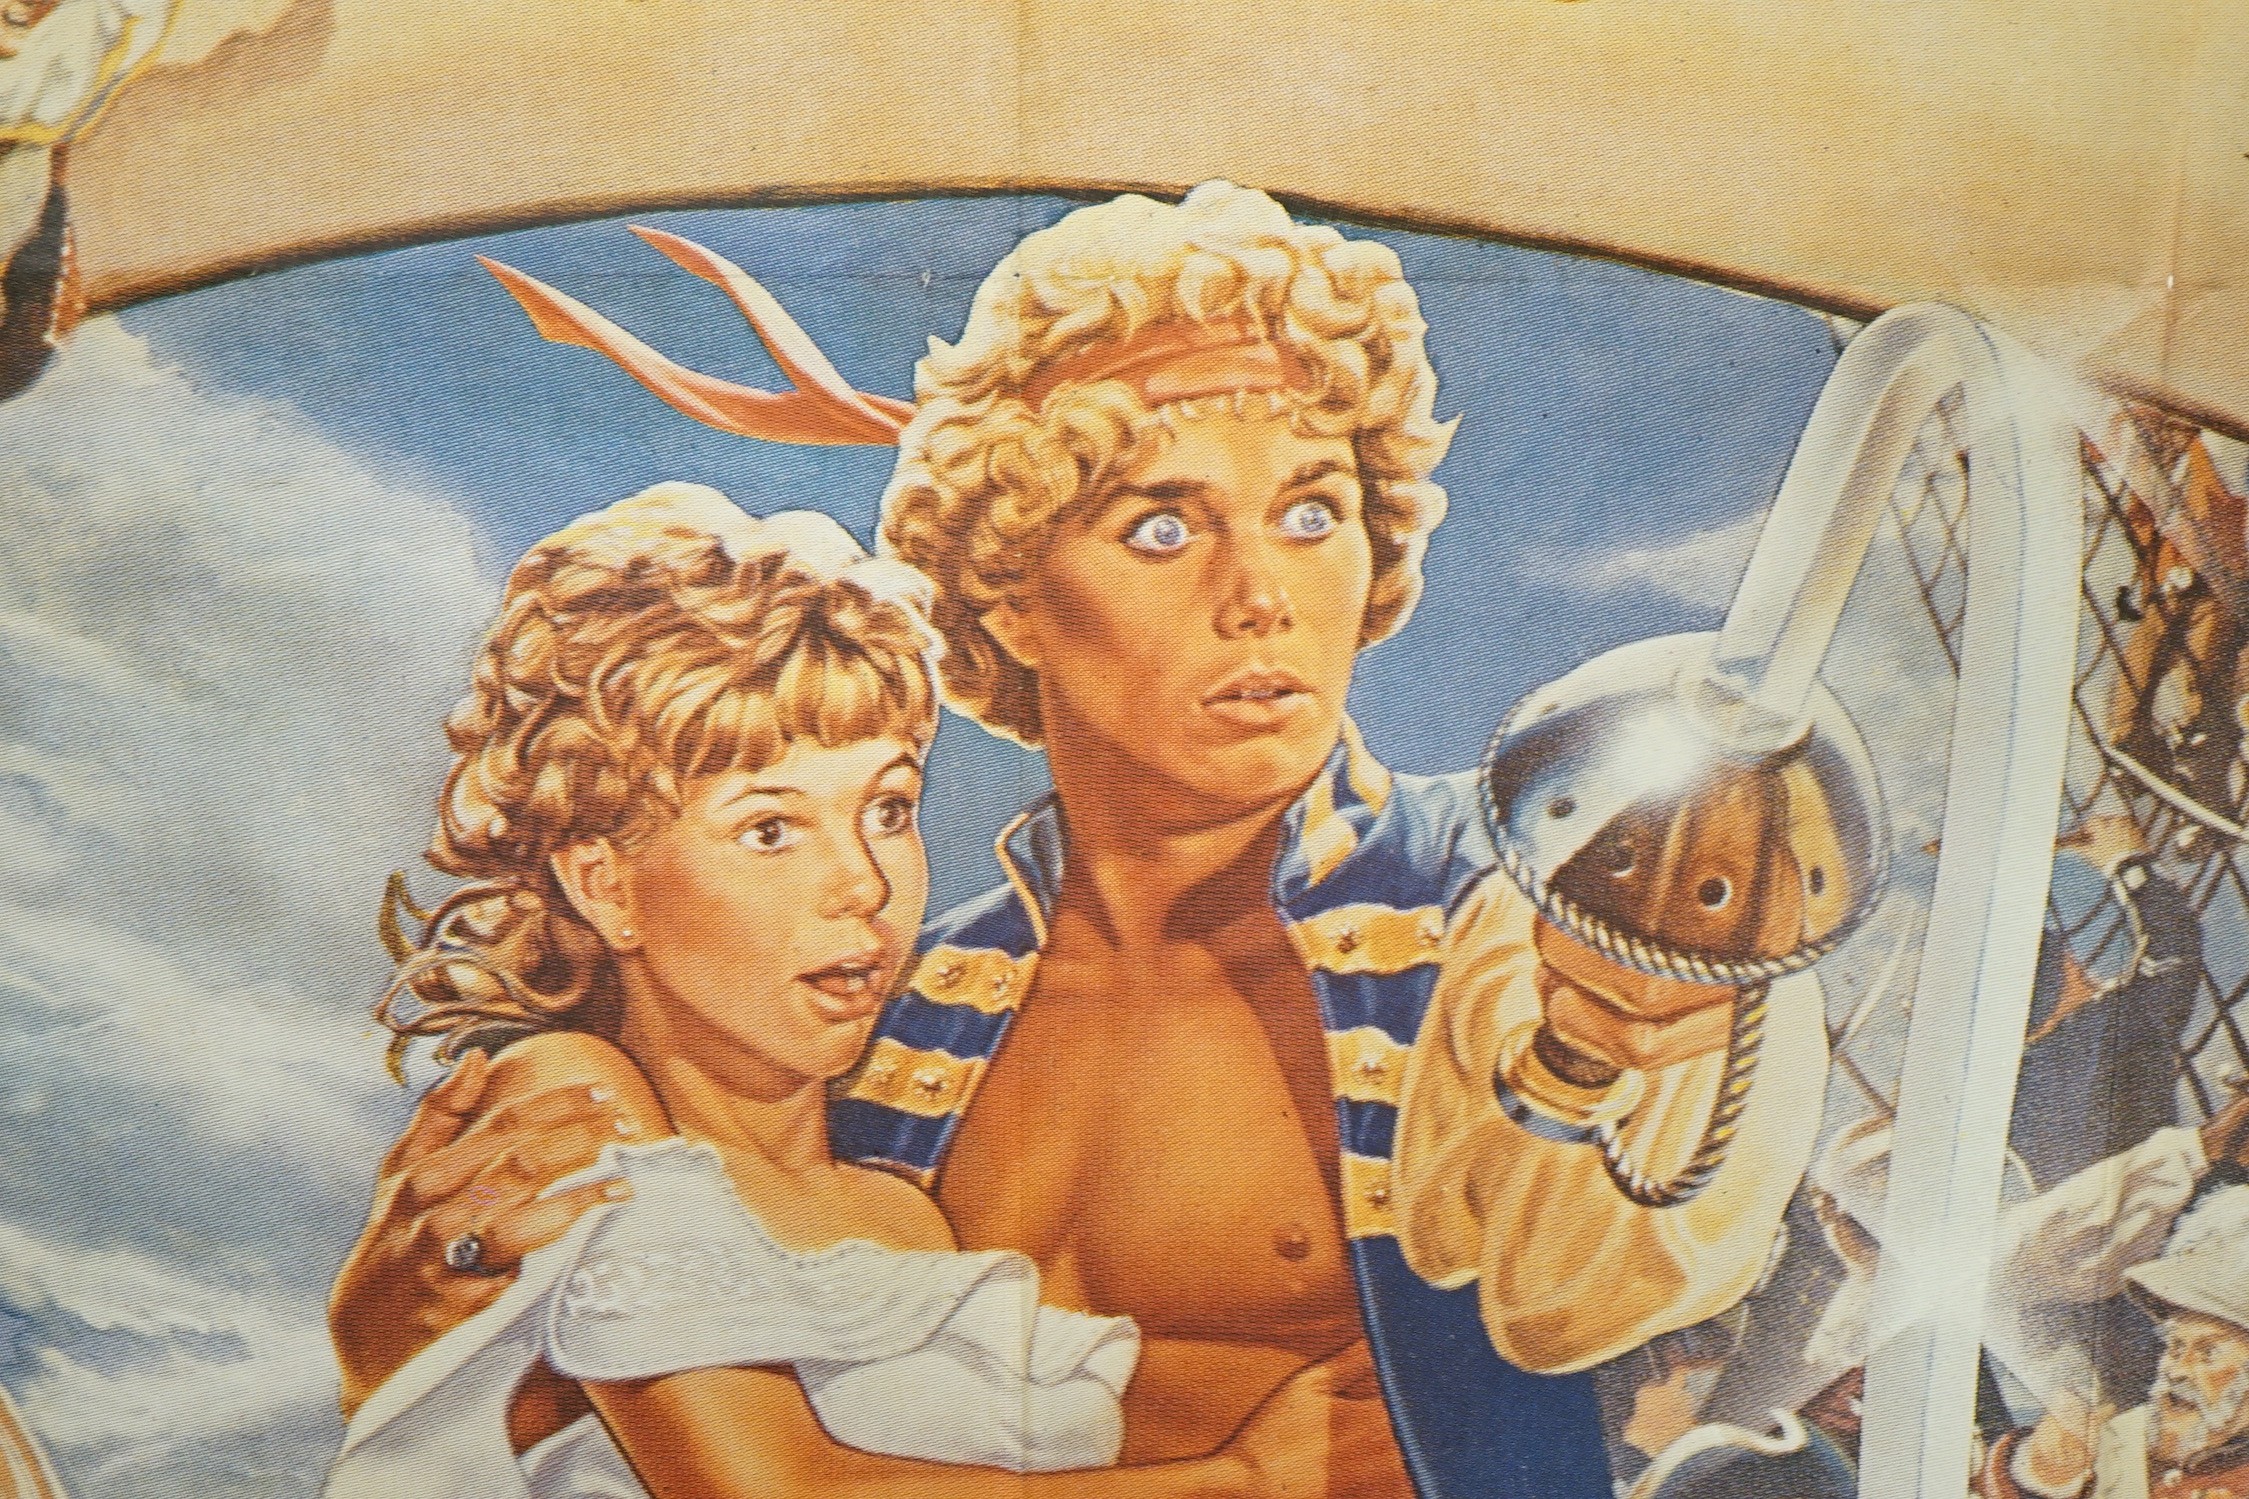 A large Pirate Movie film poster, 1982